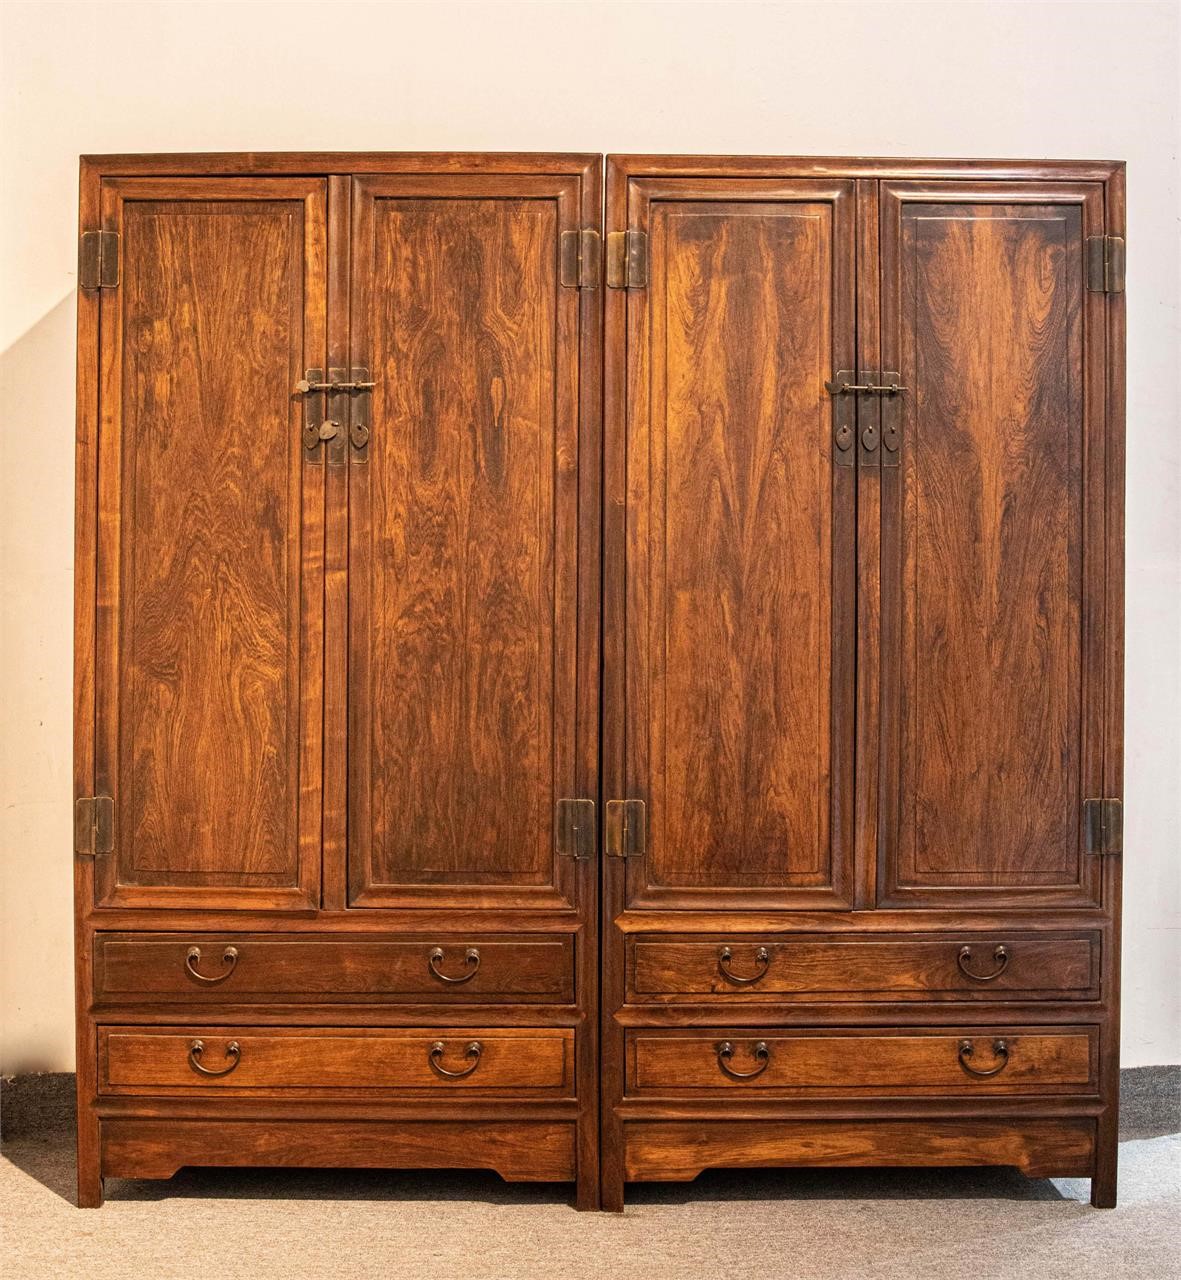 A pair of yellow pear wood cabinets